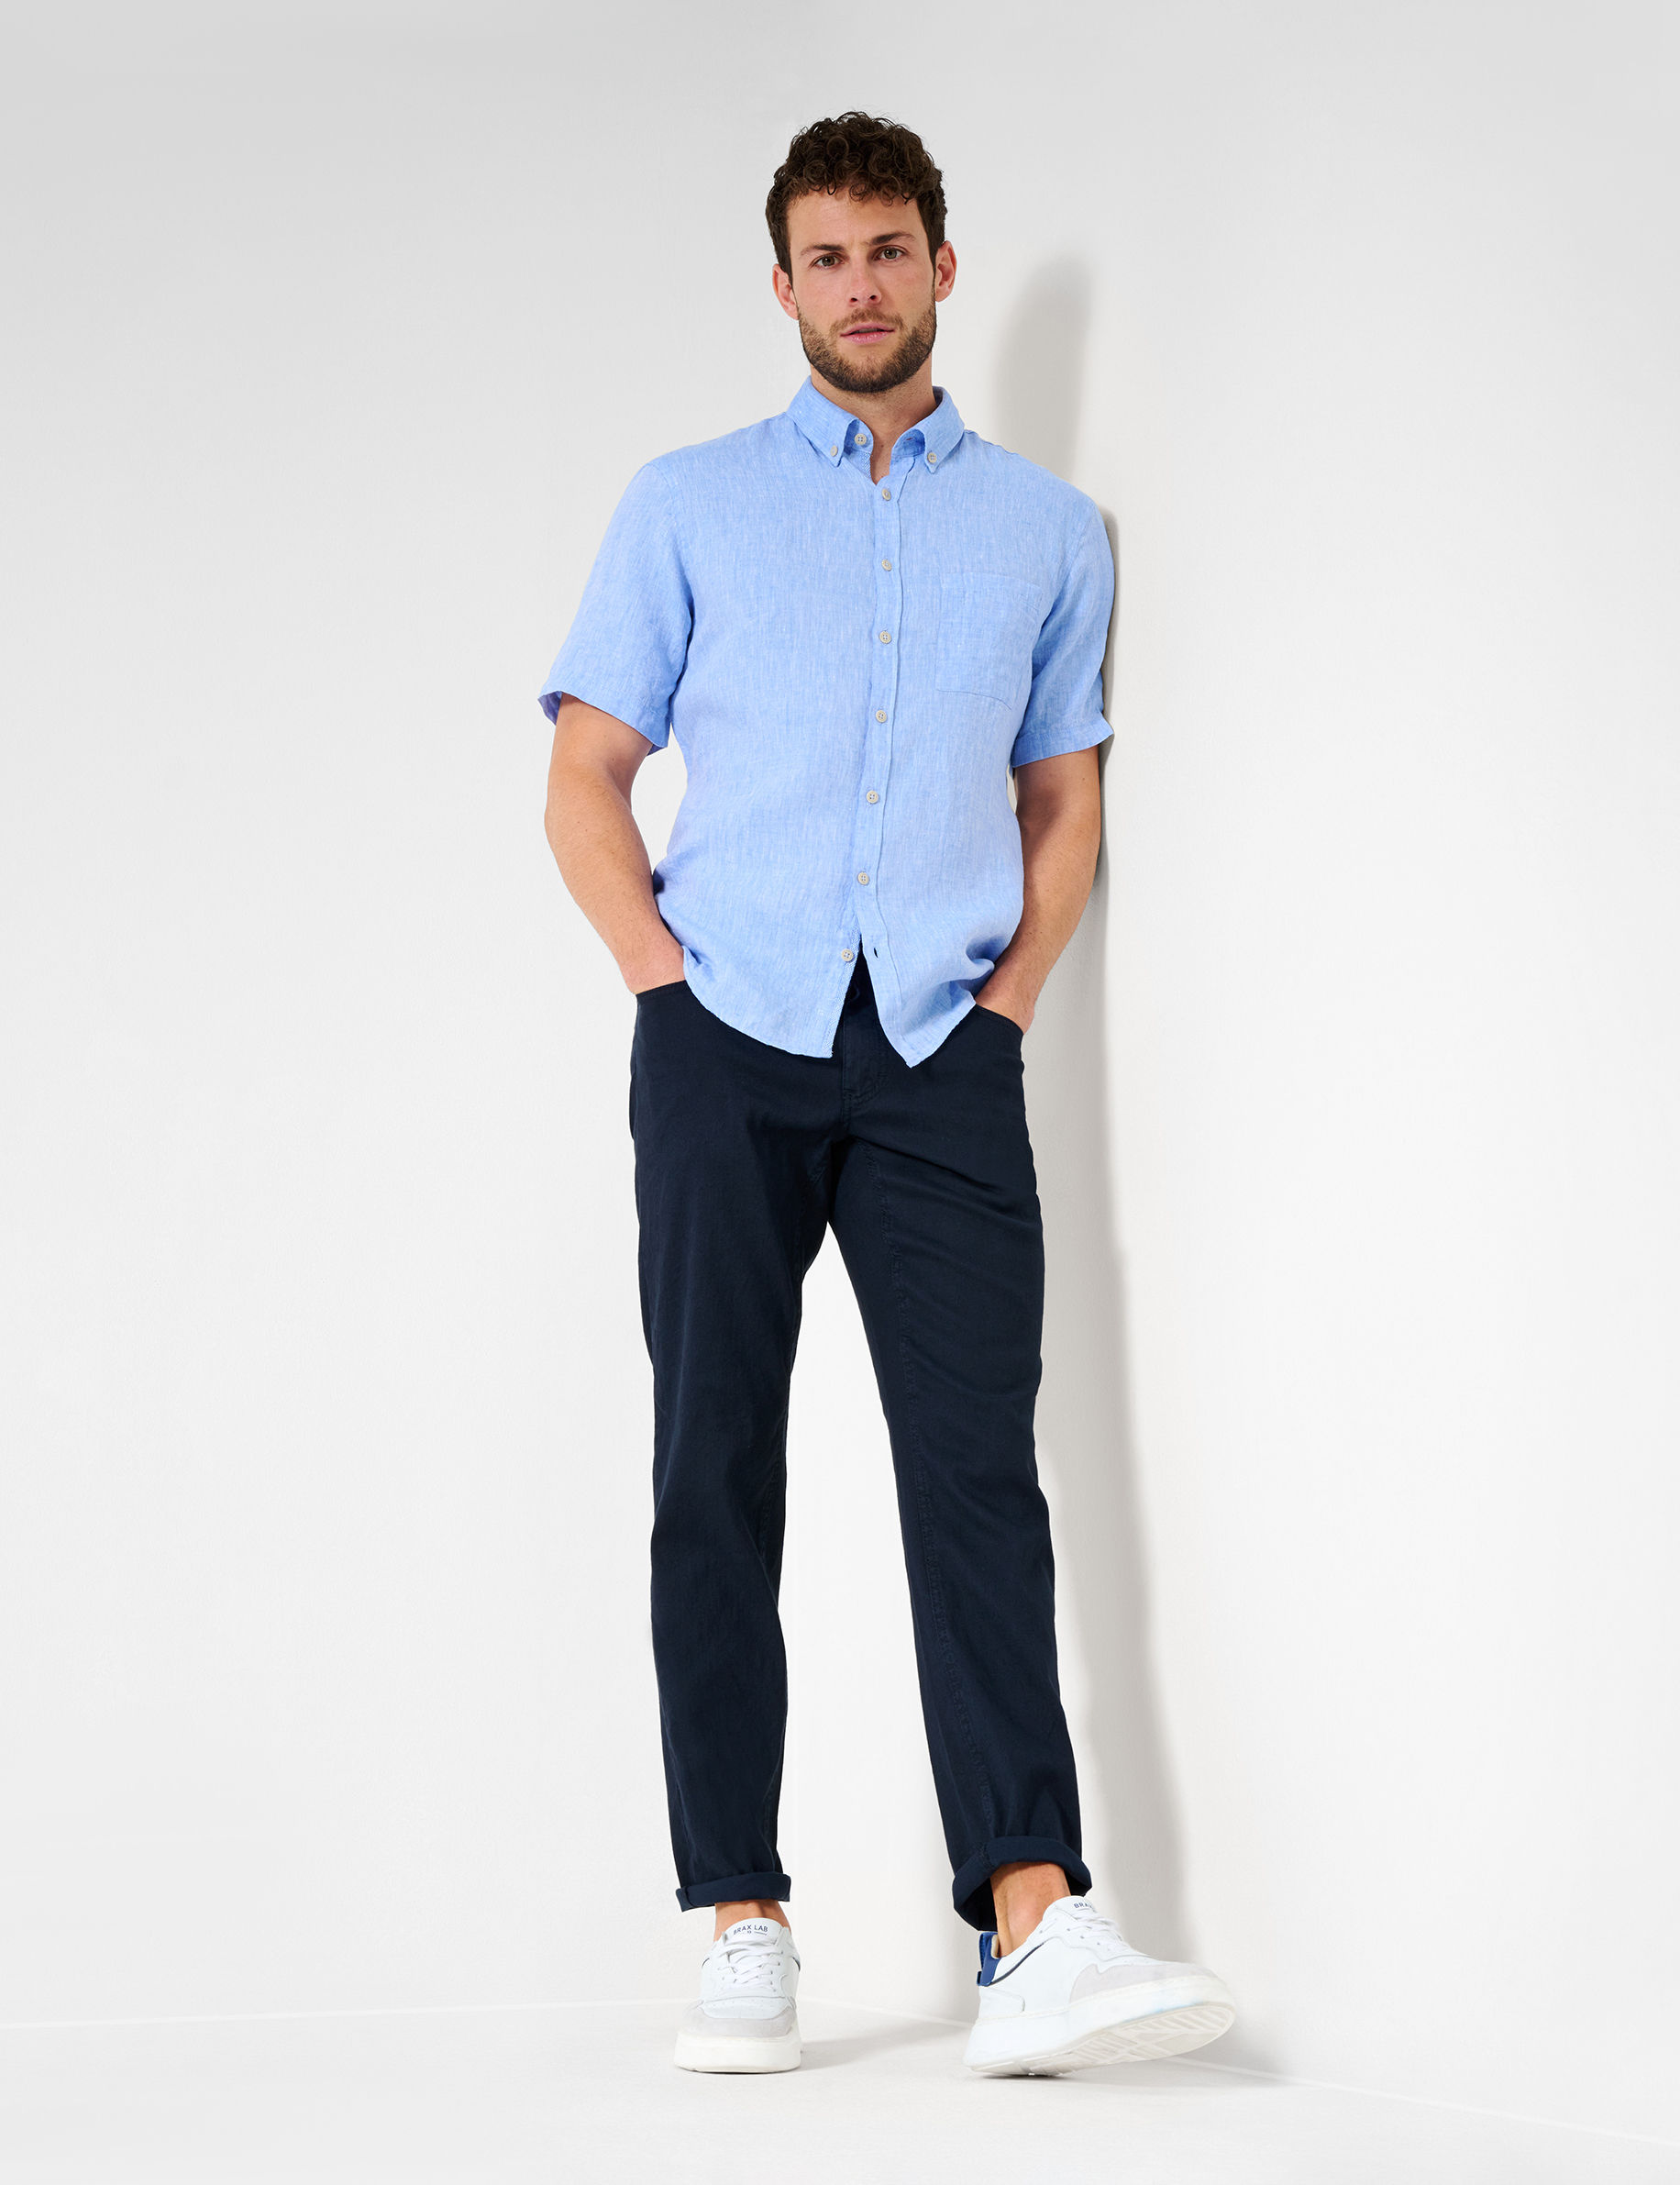 Men Style DAN smooth blue  Model Outfit